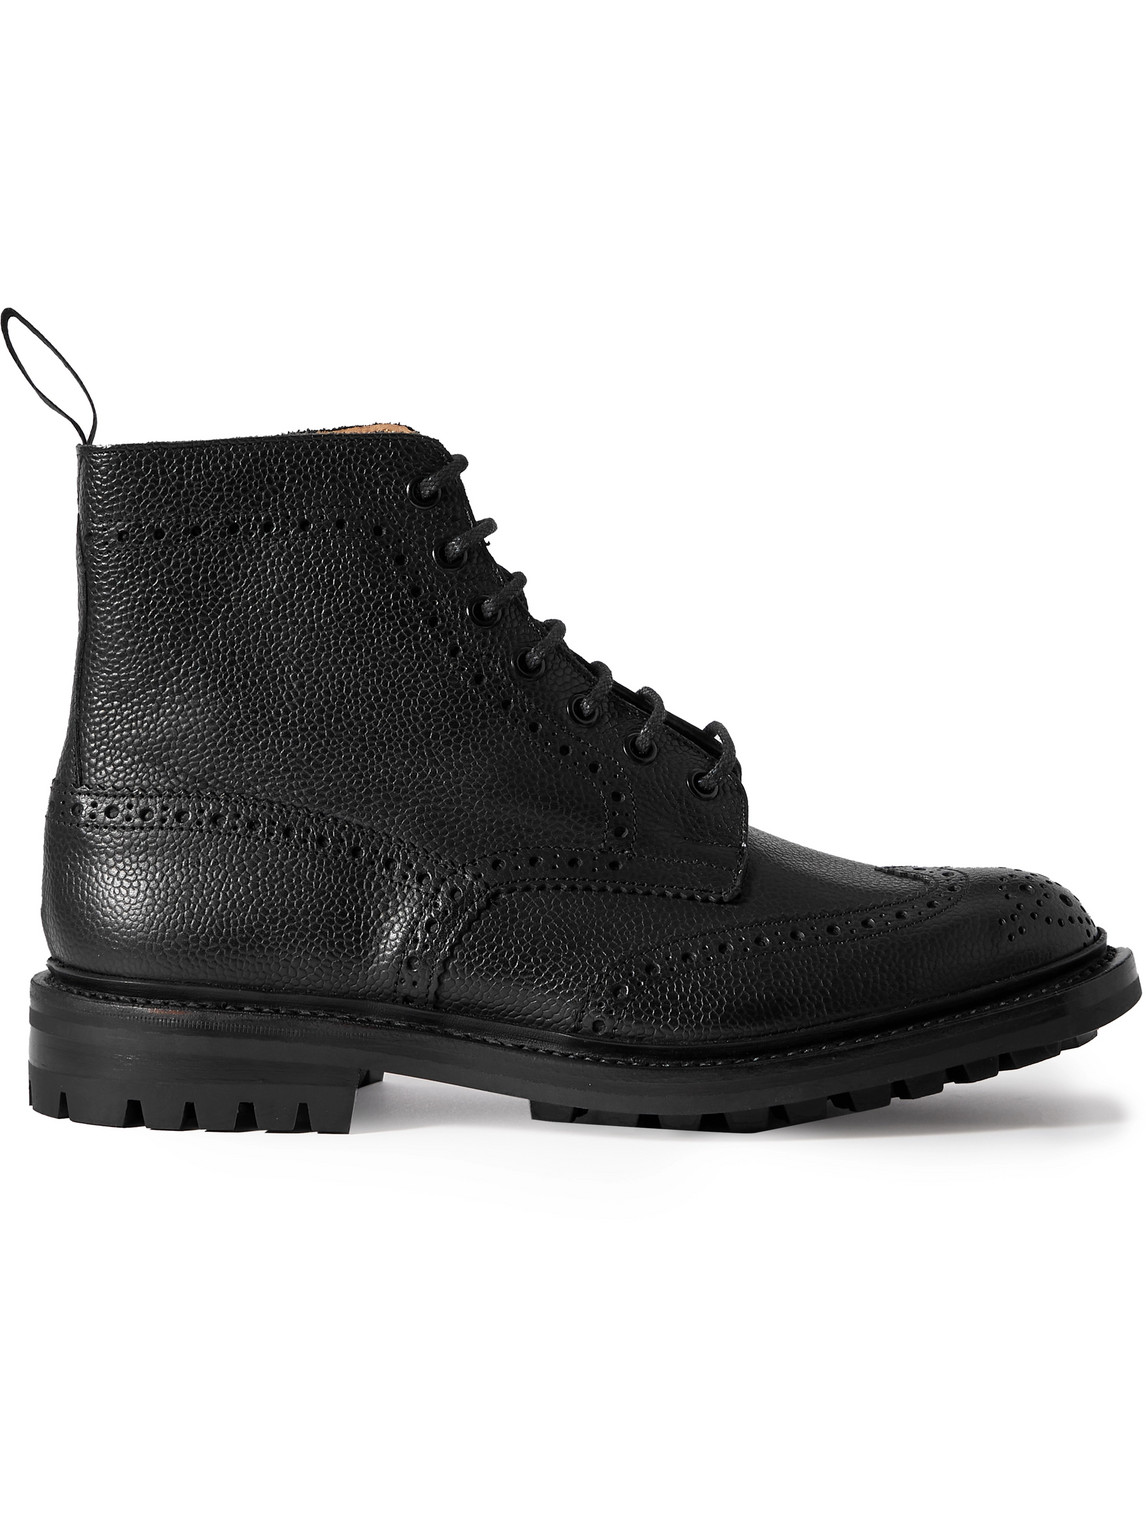 Tricker's Stow Leather Brogue Boots In Black